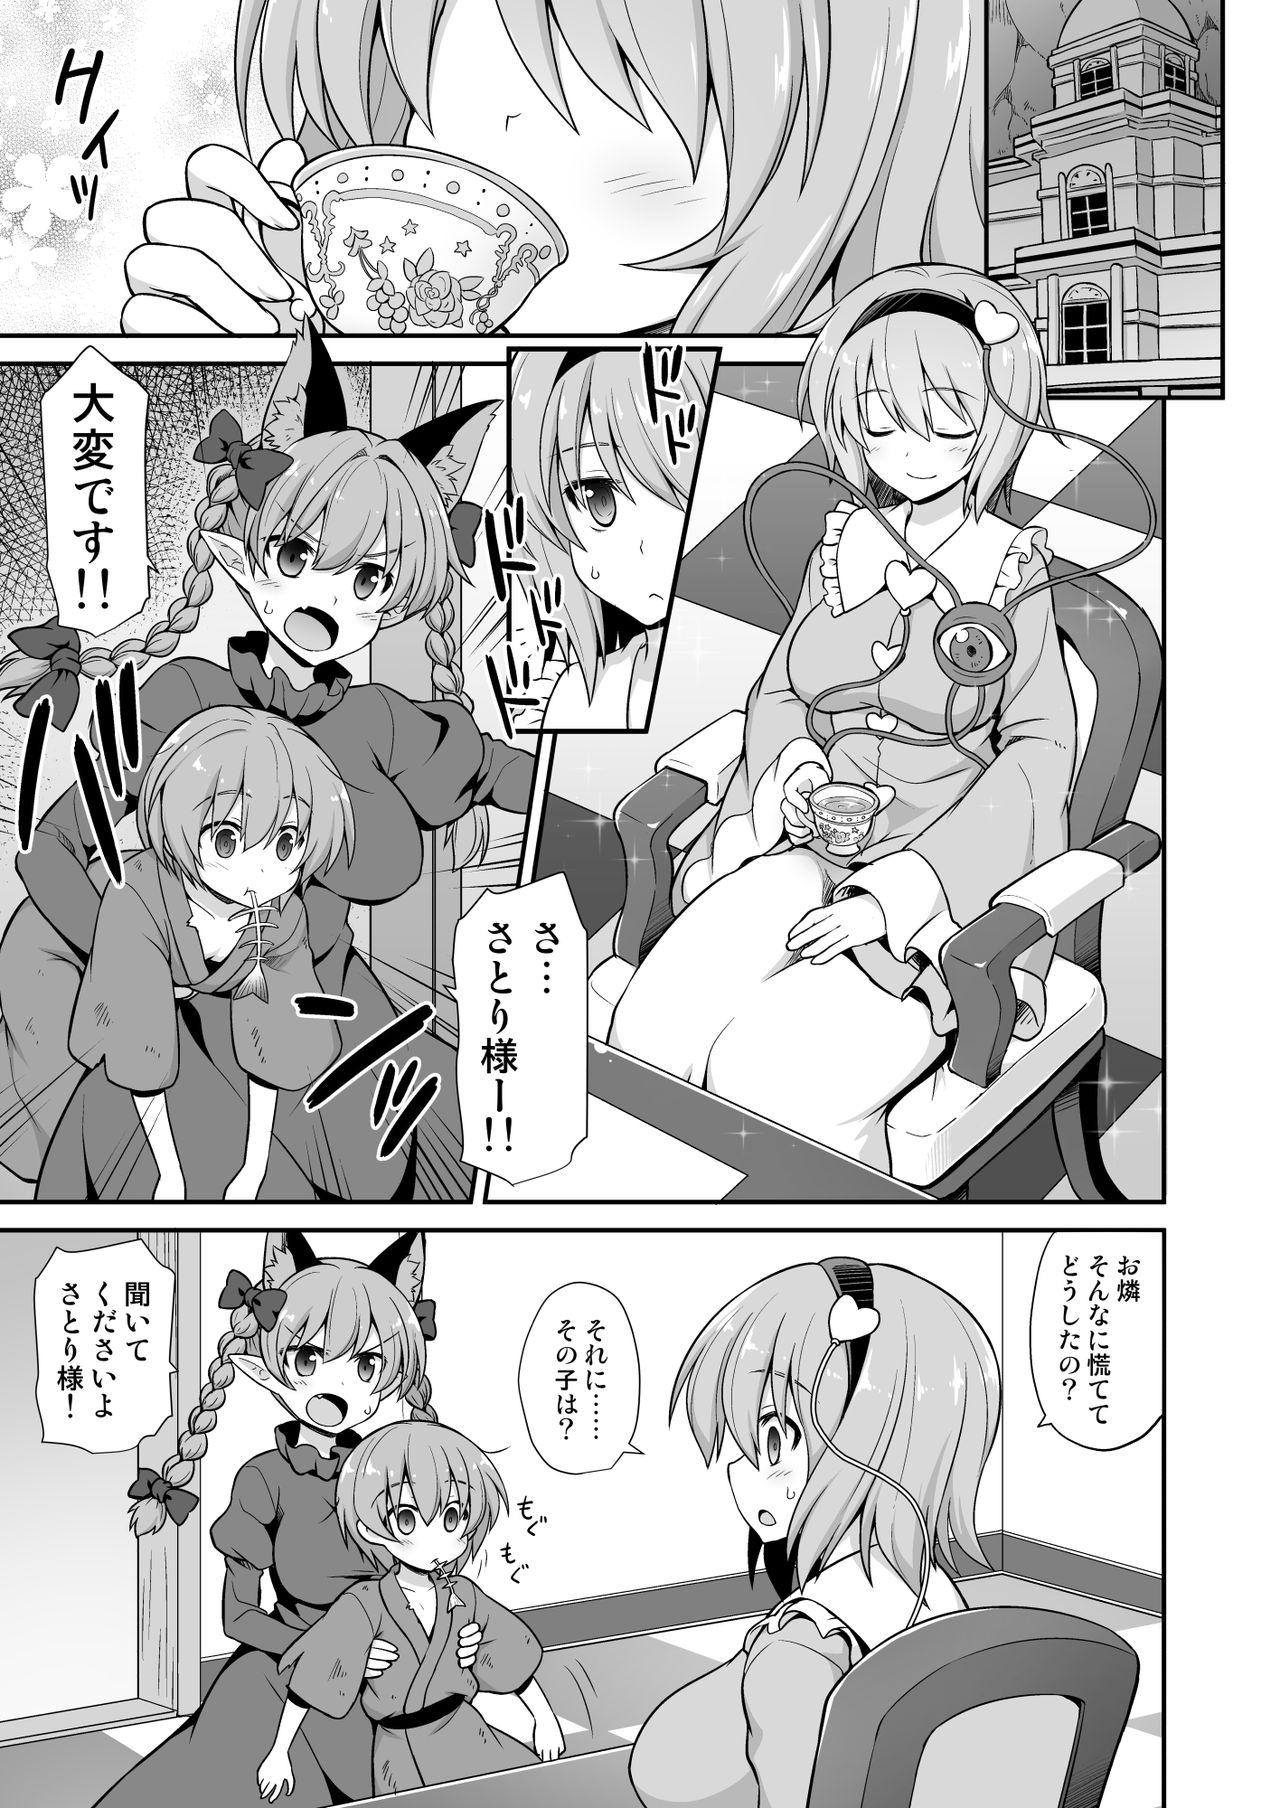 Fuck Porn Satori Onee-chan to Icha Love Amaex!! - Touhou project Amateur Teen - Page 3